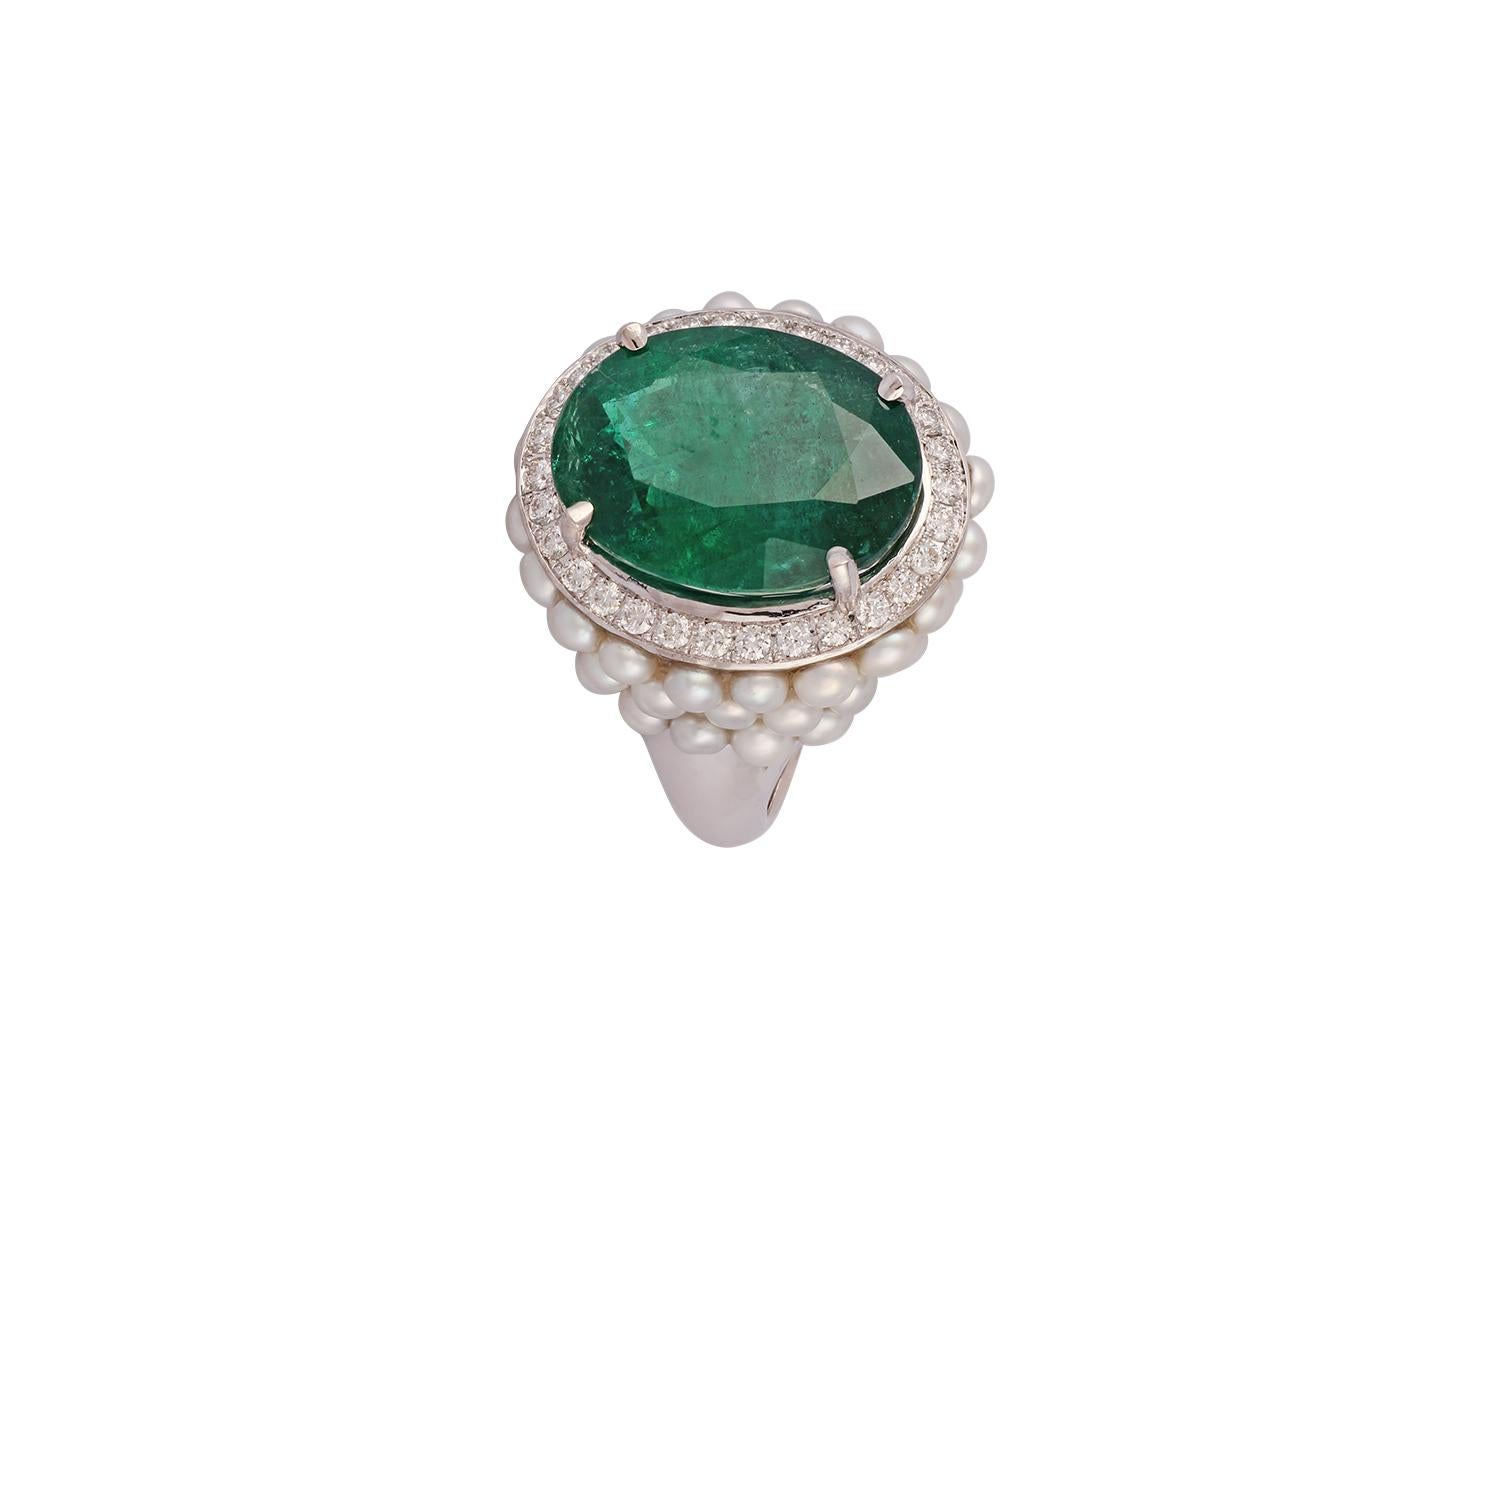 This is an elegant emerald, Pearls & diamond ring studded in 18k white gold with 1 piece of Oval Cut  shaped Zambian emerald weight 10.77 carat which is surrounded by 50 pieces of Pearls weight 4.53 carat & round shaped diamonds weight 0.44 carat,